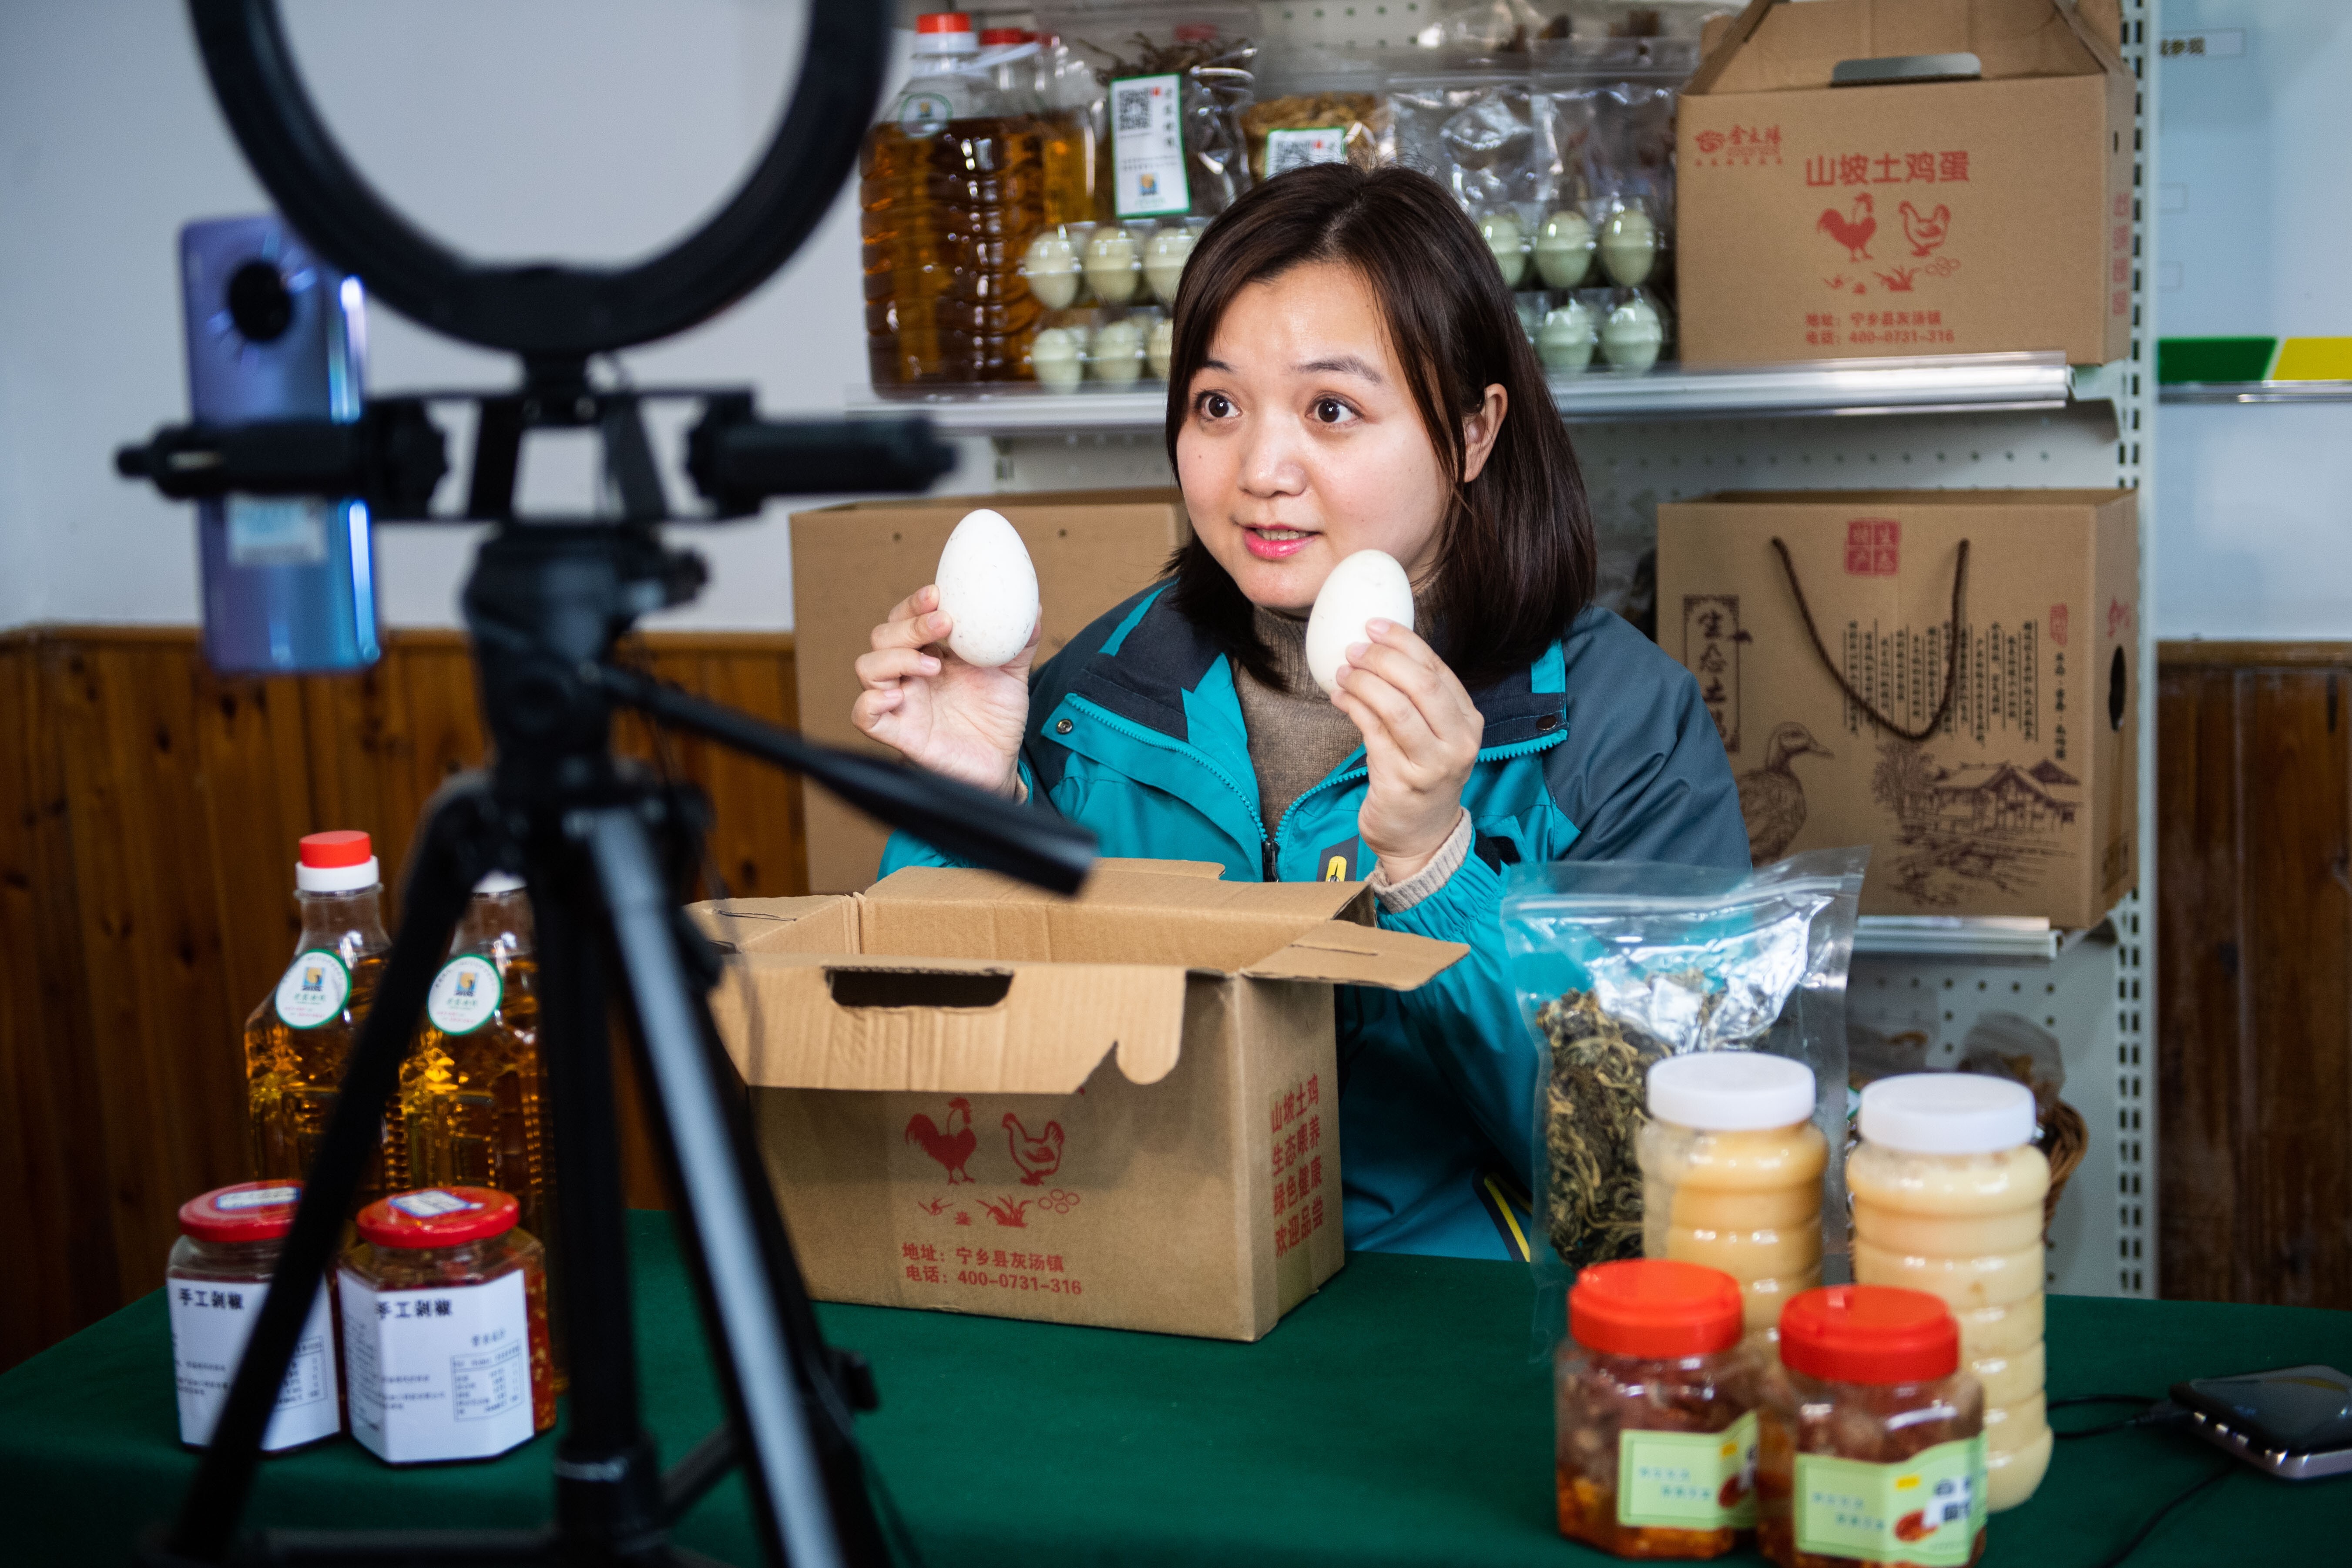 Zhang Qin, an overseas returnee, introduces eggs on March 13 via a live stream on an e-commerce platform she founded in Huitang village in central China’s Hunan Province. Photo: Xinhua